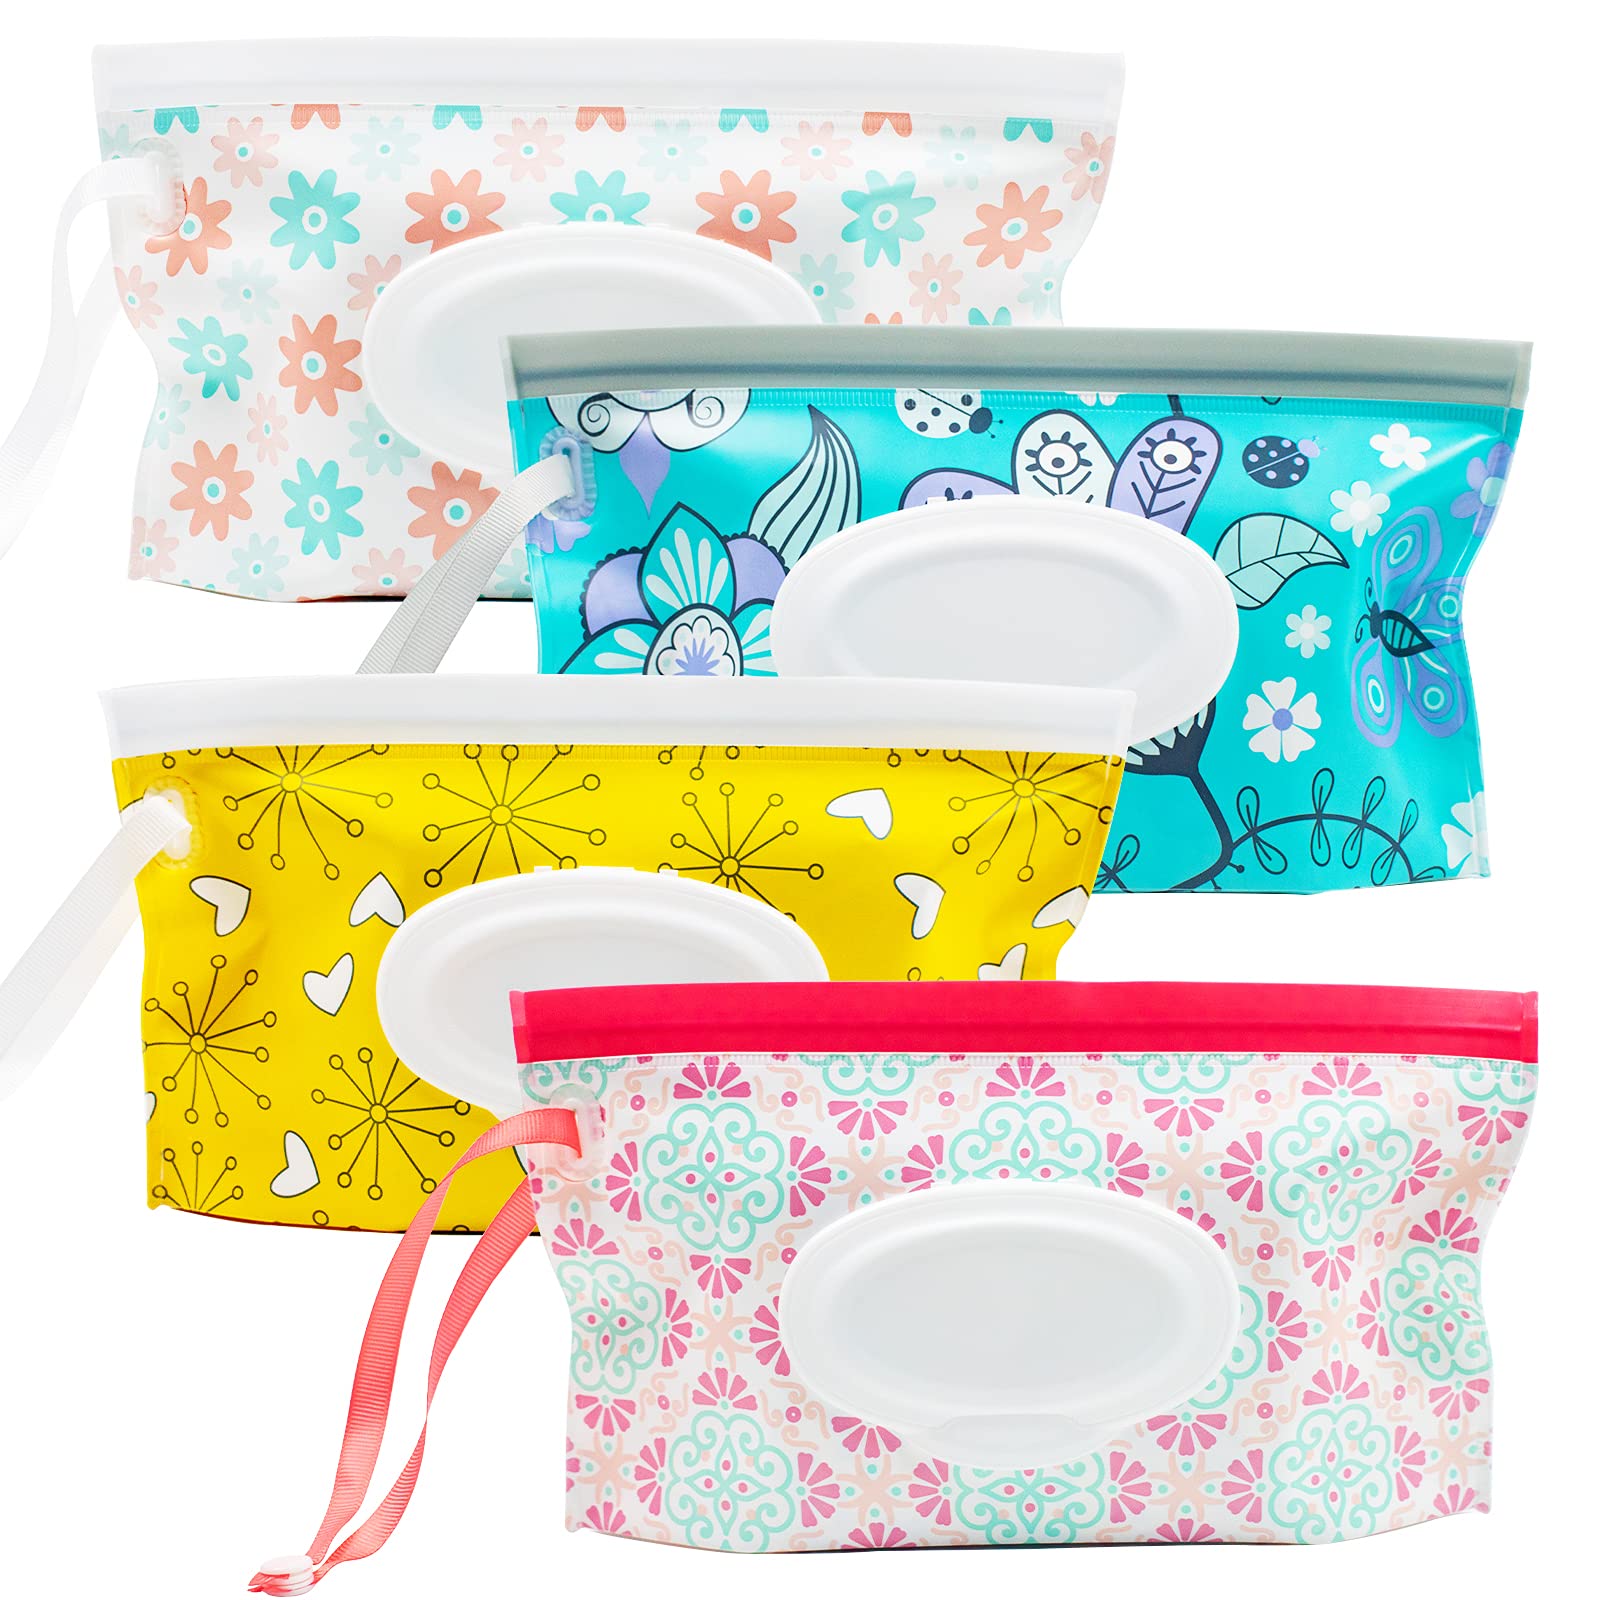 Baby Wipe Pouch - Wipes Cases & Holders